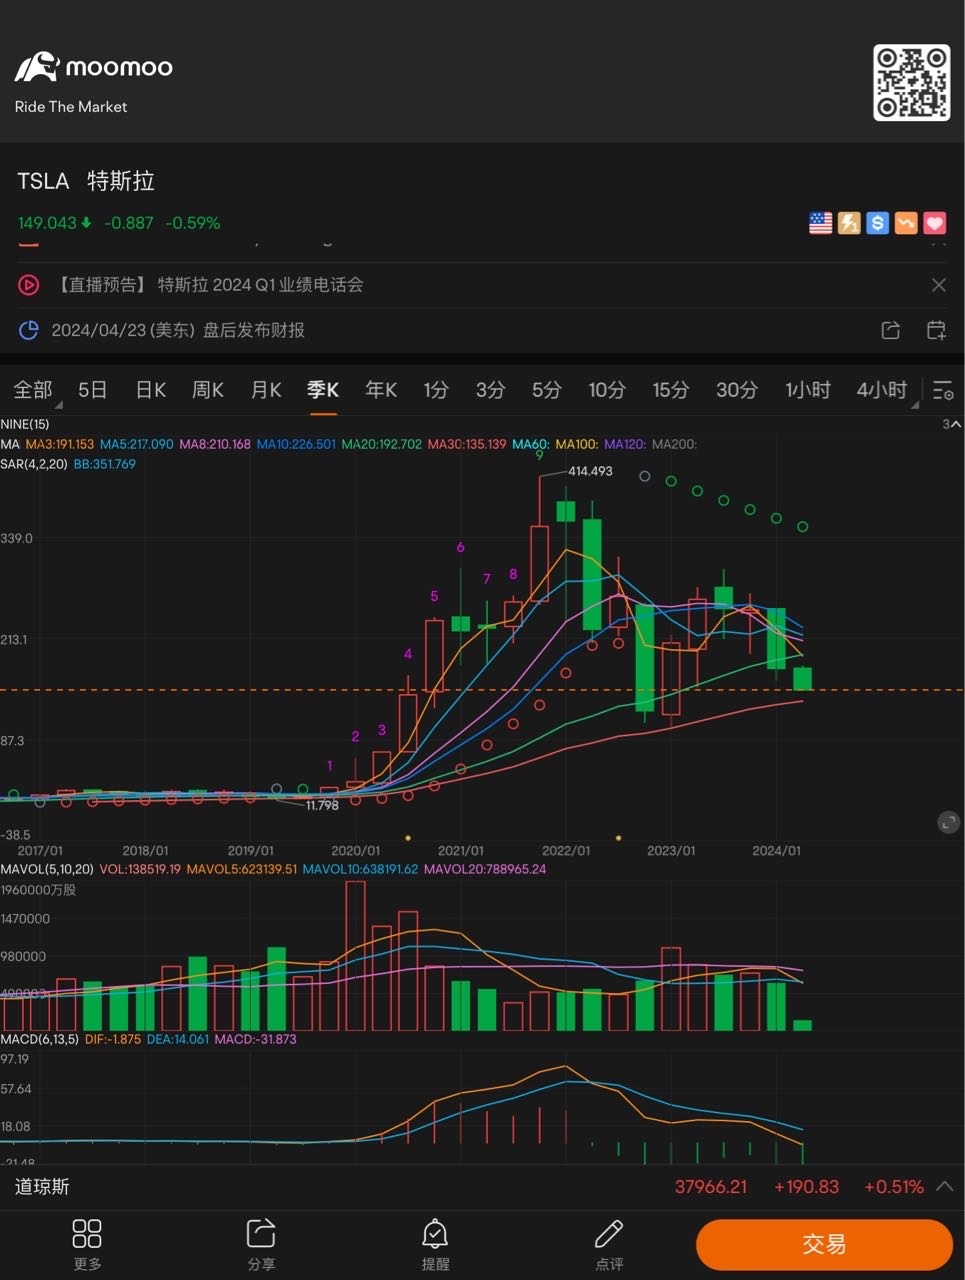 Support position 135 or so, let's look at the Ma30 support line from the quarterly line $Tesla (TSLA.US)$